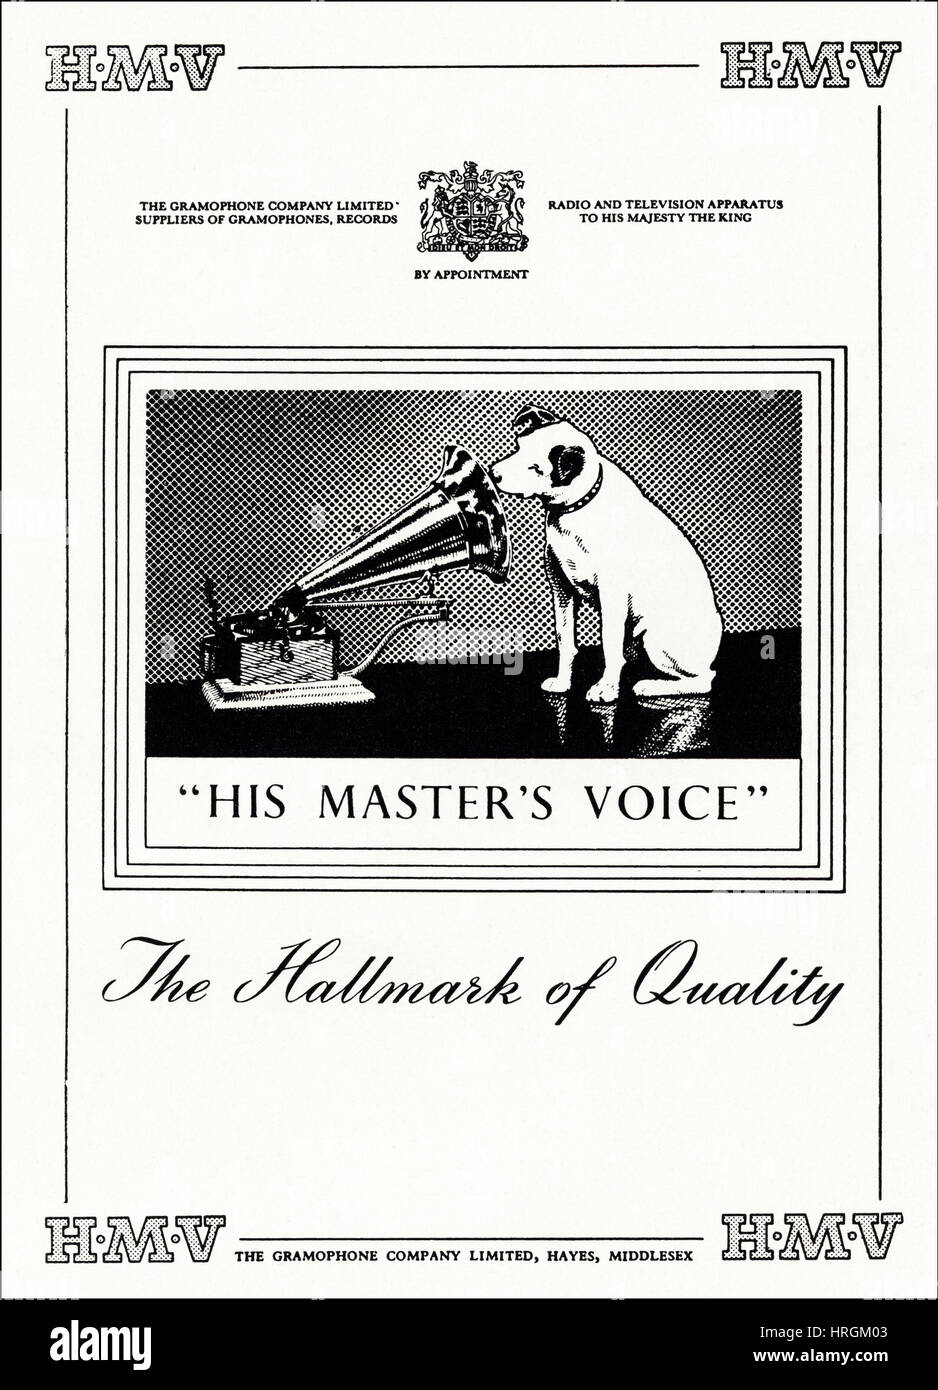 1950s advertising advert from original old vintage English magazine dated 1950 advertisement for HMV The Gramophone Company Limited of Hayes Middlesex England UK by Royal Appointment Stock Photo